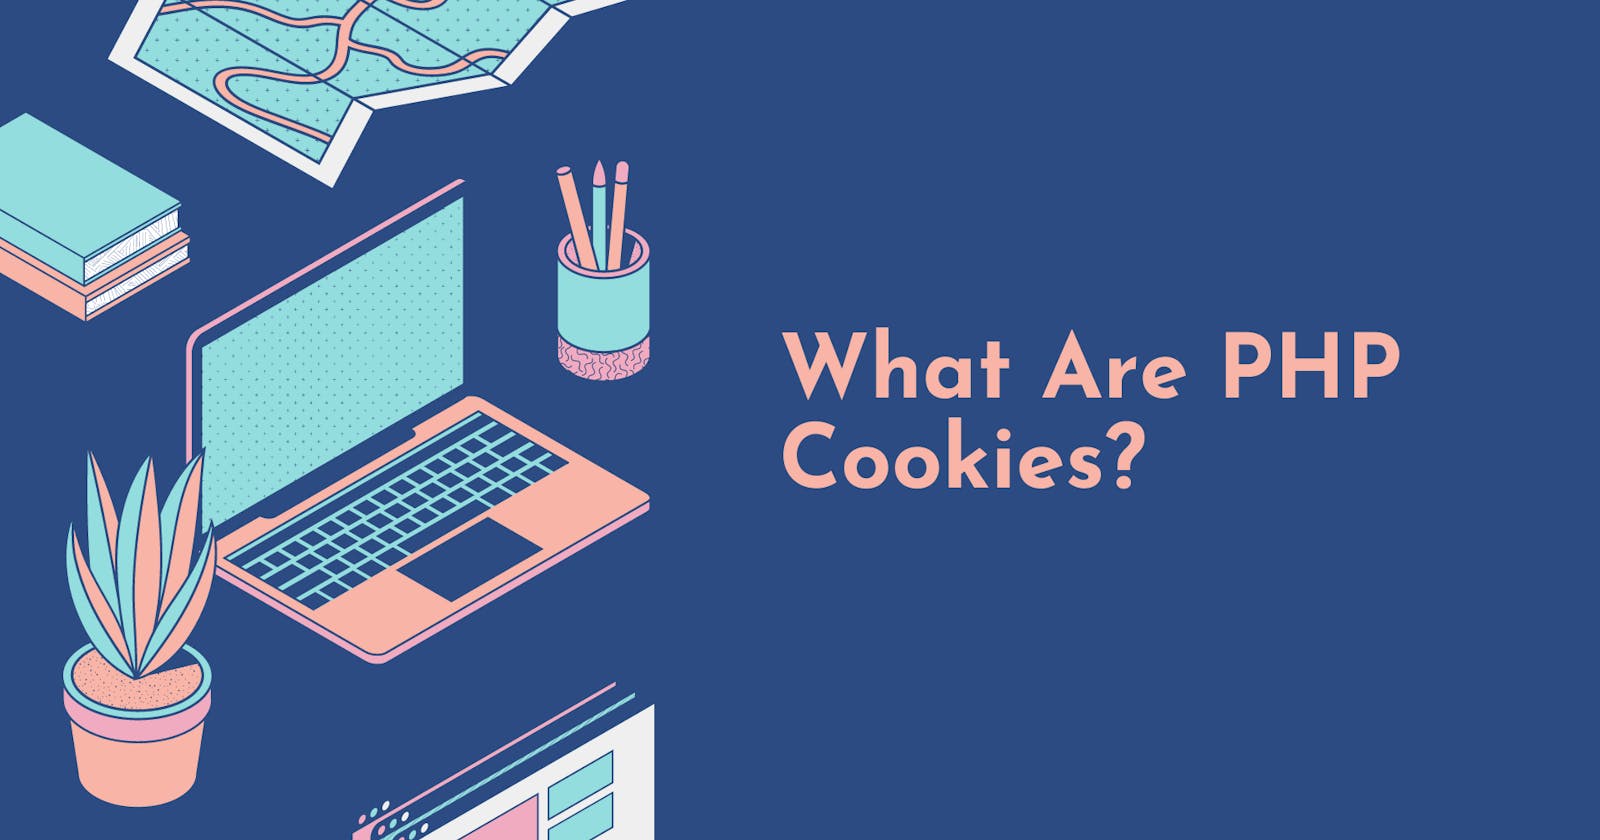 What Are PHP Cookies?